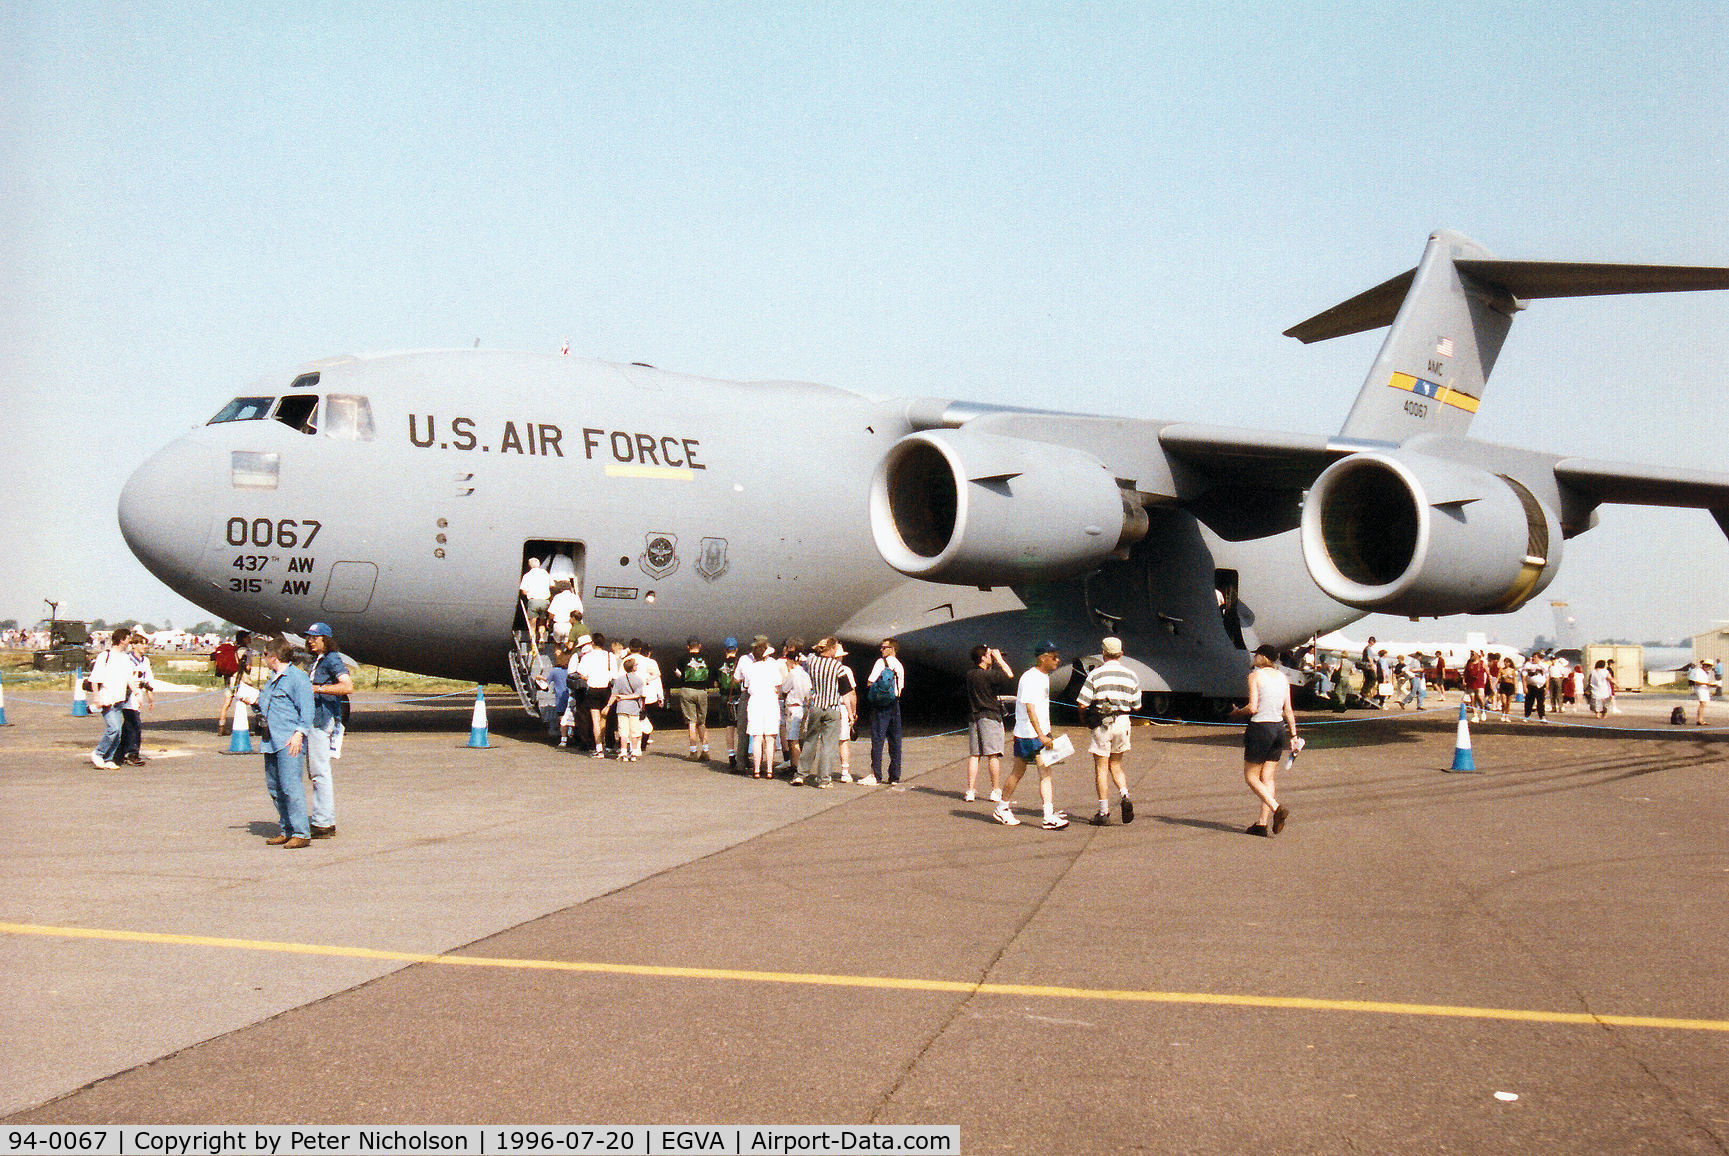 94-0067, 1994 McDonnell Douglas C-17A Globemaster III C/N 50027/F-26, C-17A Globemaster of 437th Airlift Wing at Charleston AFB on display at the 1996 Royal Intnl Air Tattoo at RAF Fairford.